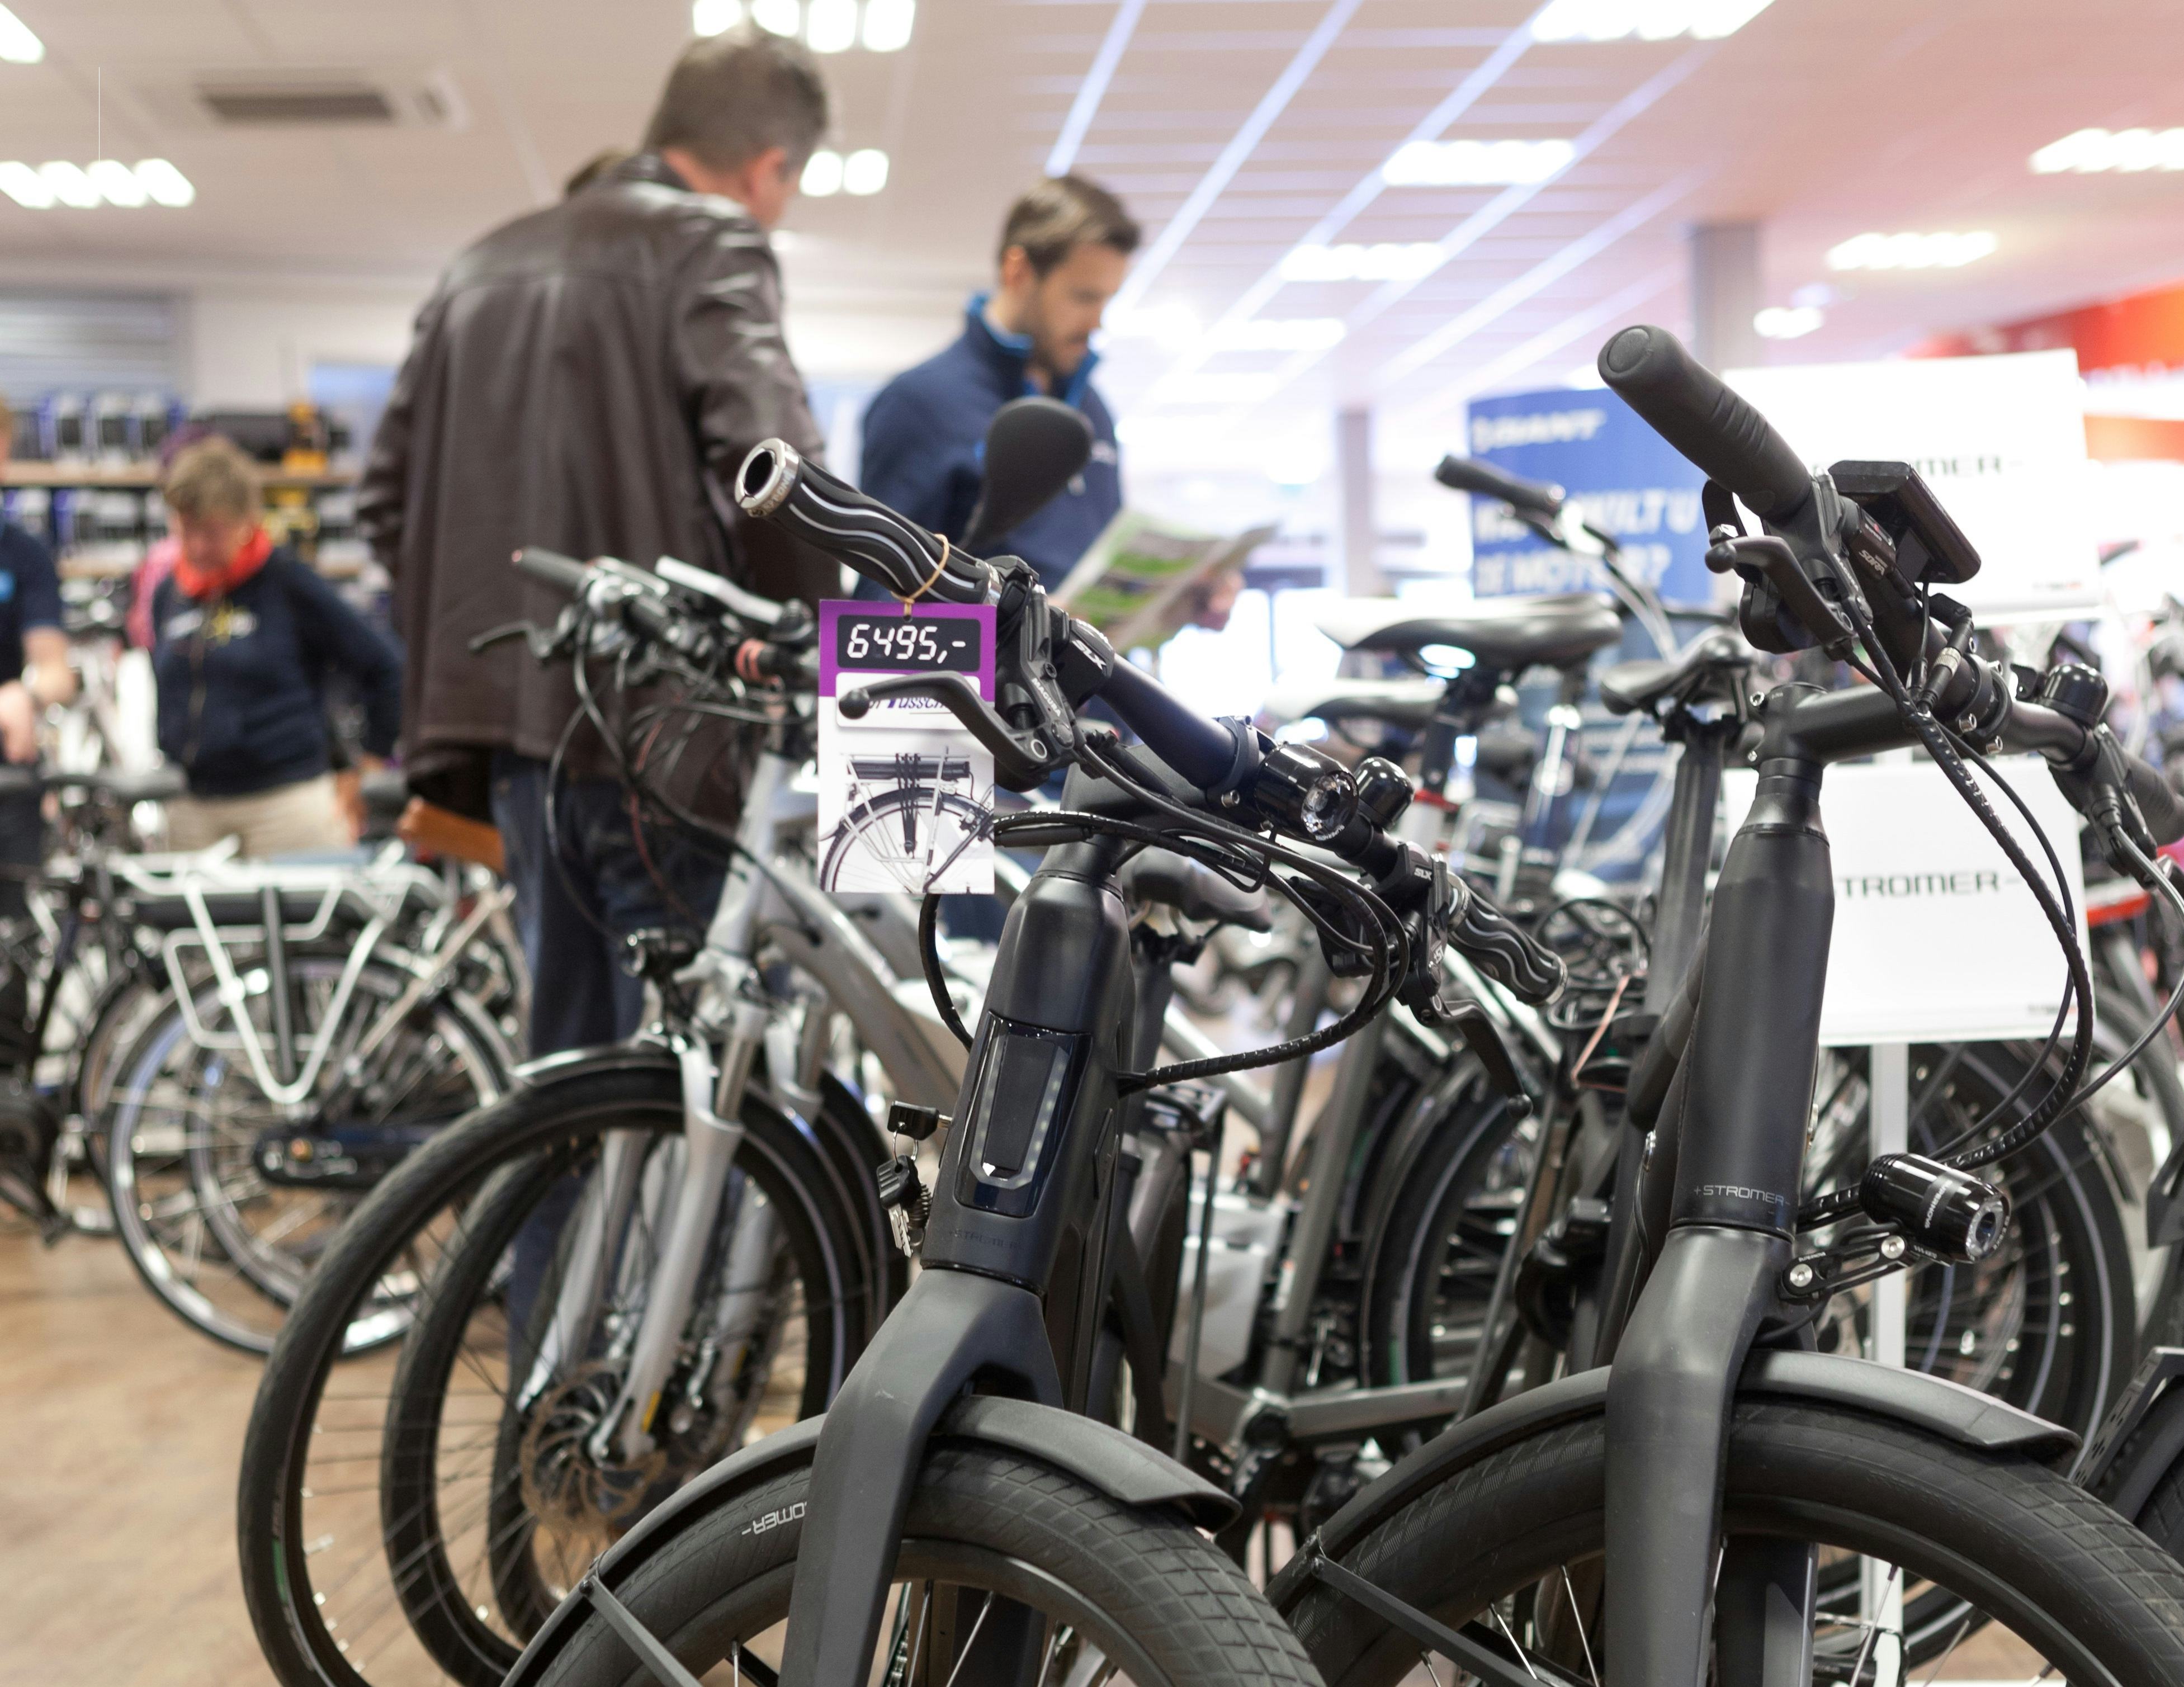 Speed pedelec buyers are willing to pay as most expensive brand is leading Dutch market; Stromer. – Photo Bike Europe